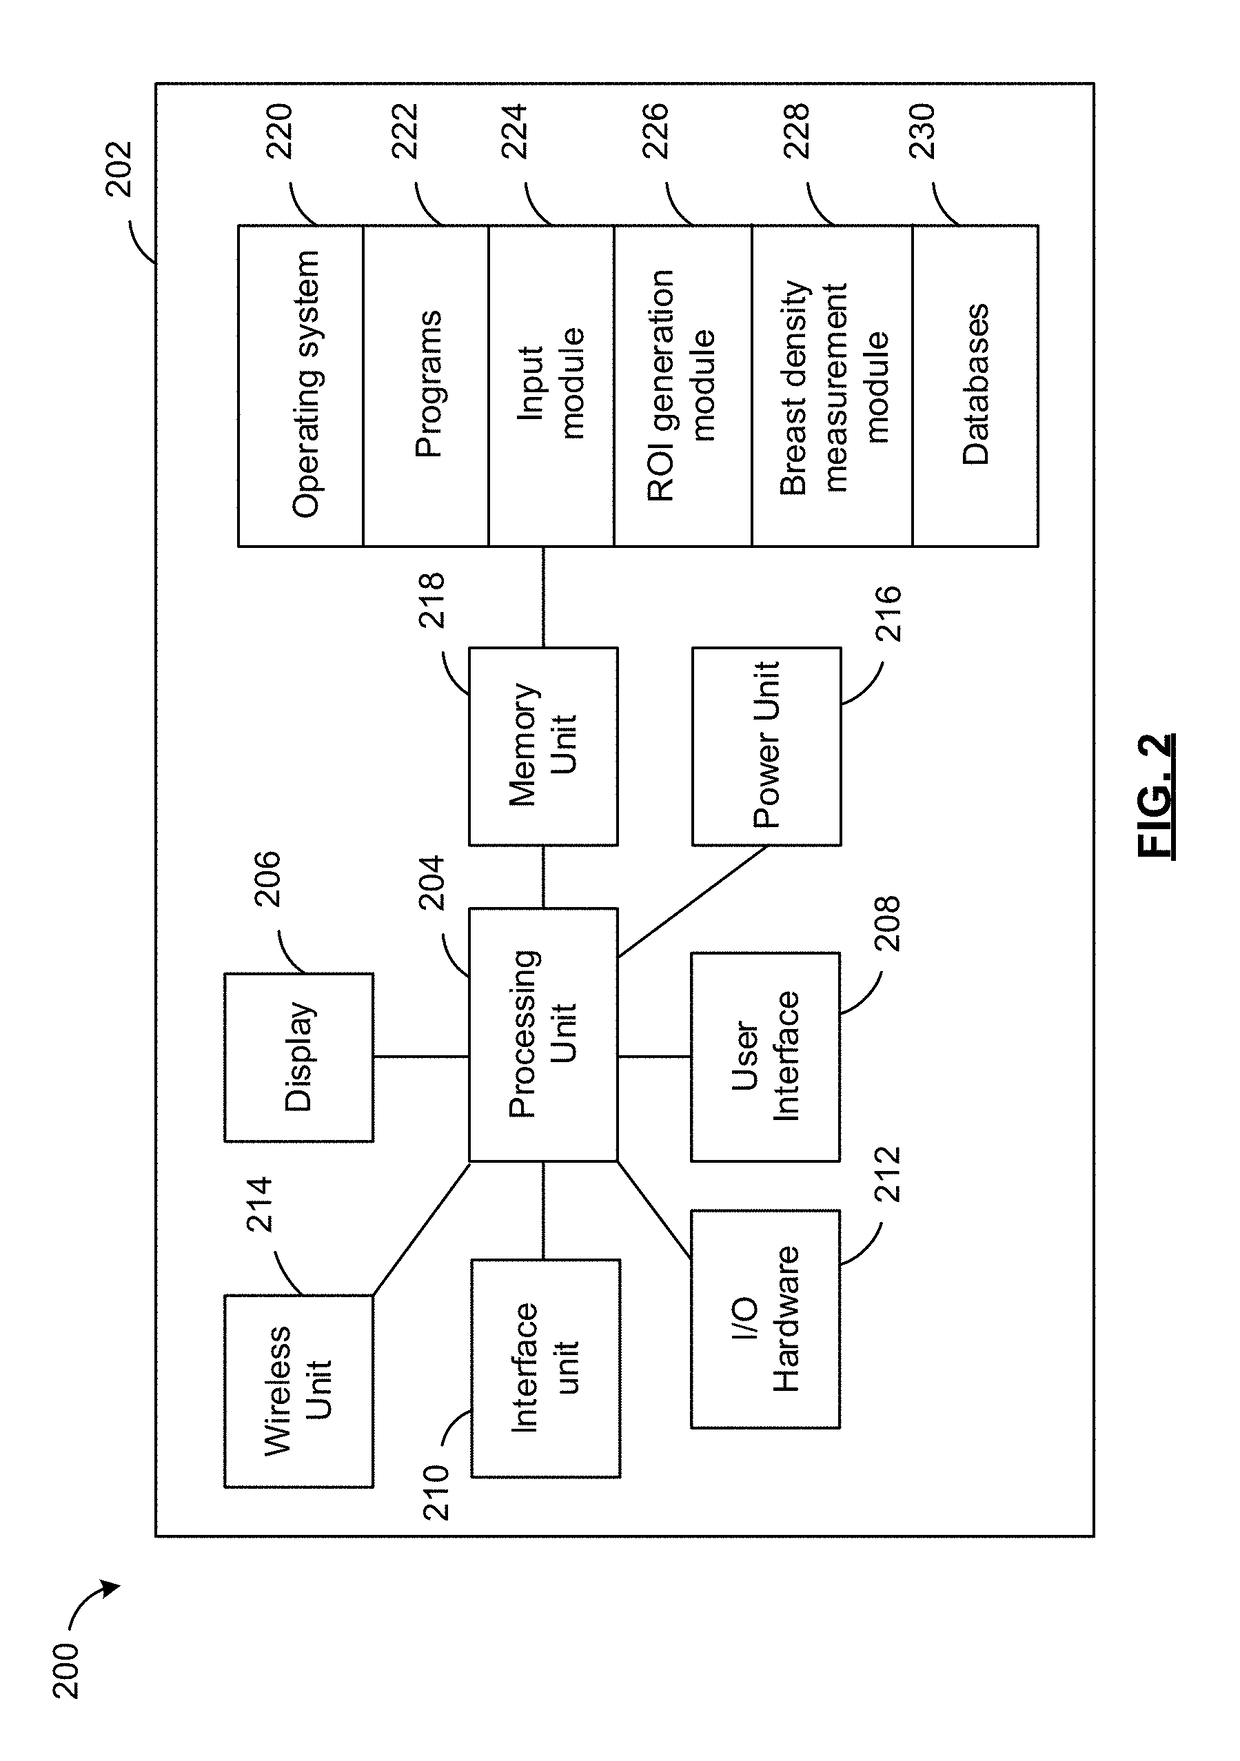 Methods and systems for determining breast density